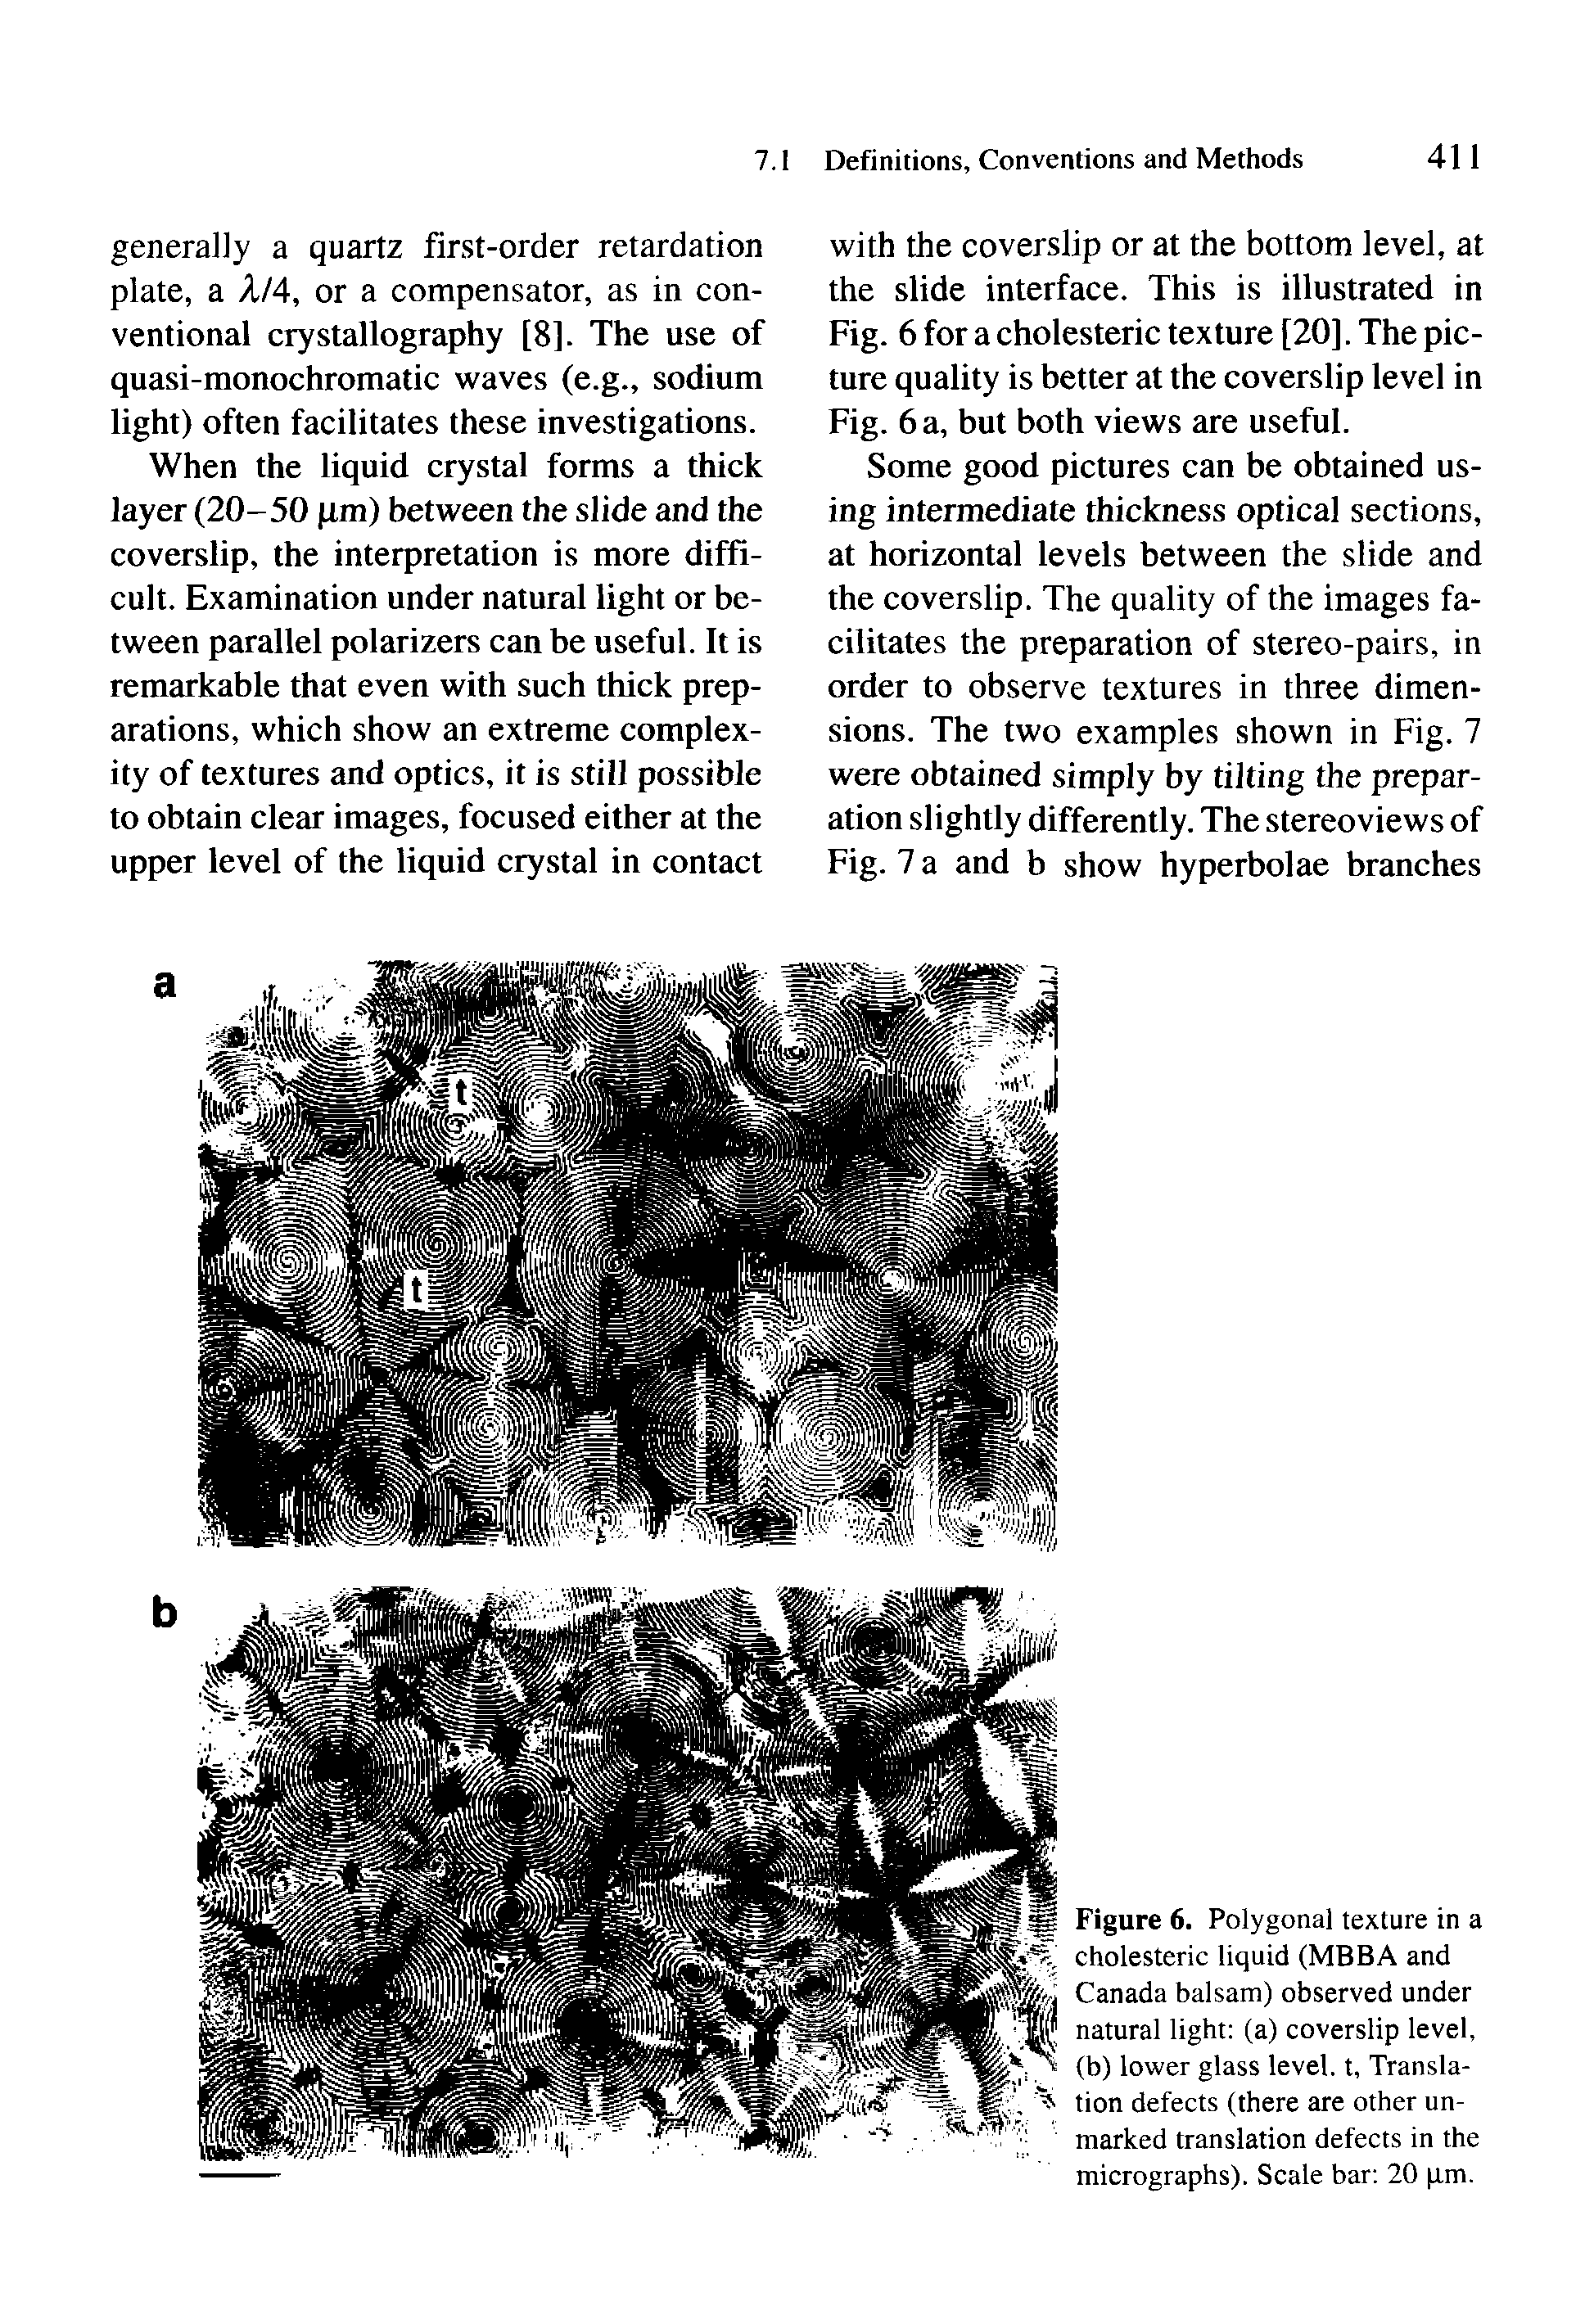 Figure 6. Polygonal texture in a cholesteric liquid (MBBA and Canada balsam) observed under natural light (a) coverslip level, (b) lower glass level, t. Translation defects (there are other unmarked translation defects in the micrographs). Scale bar 20 pm.